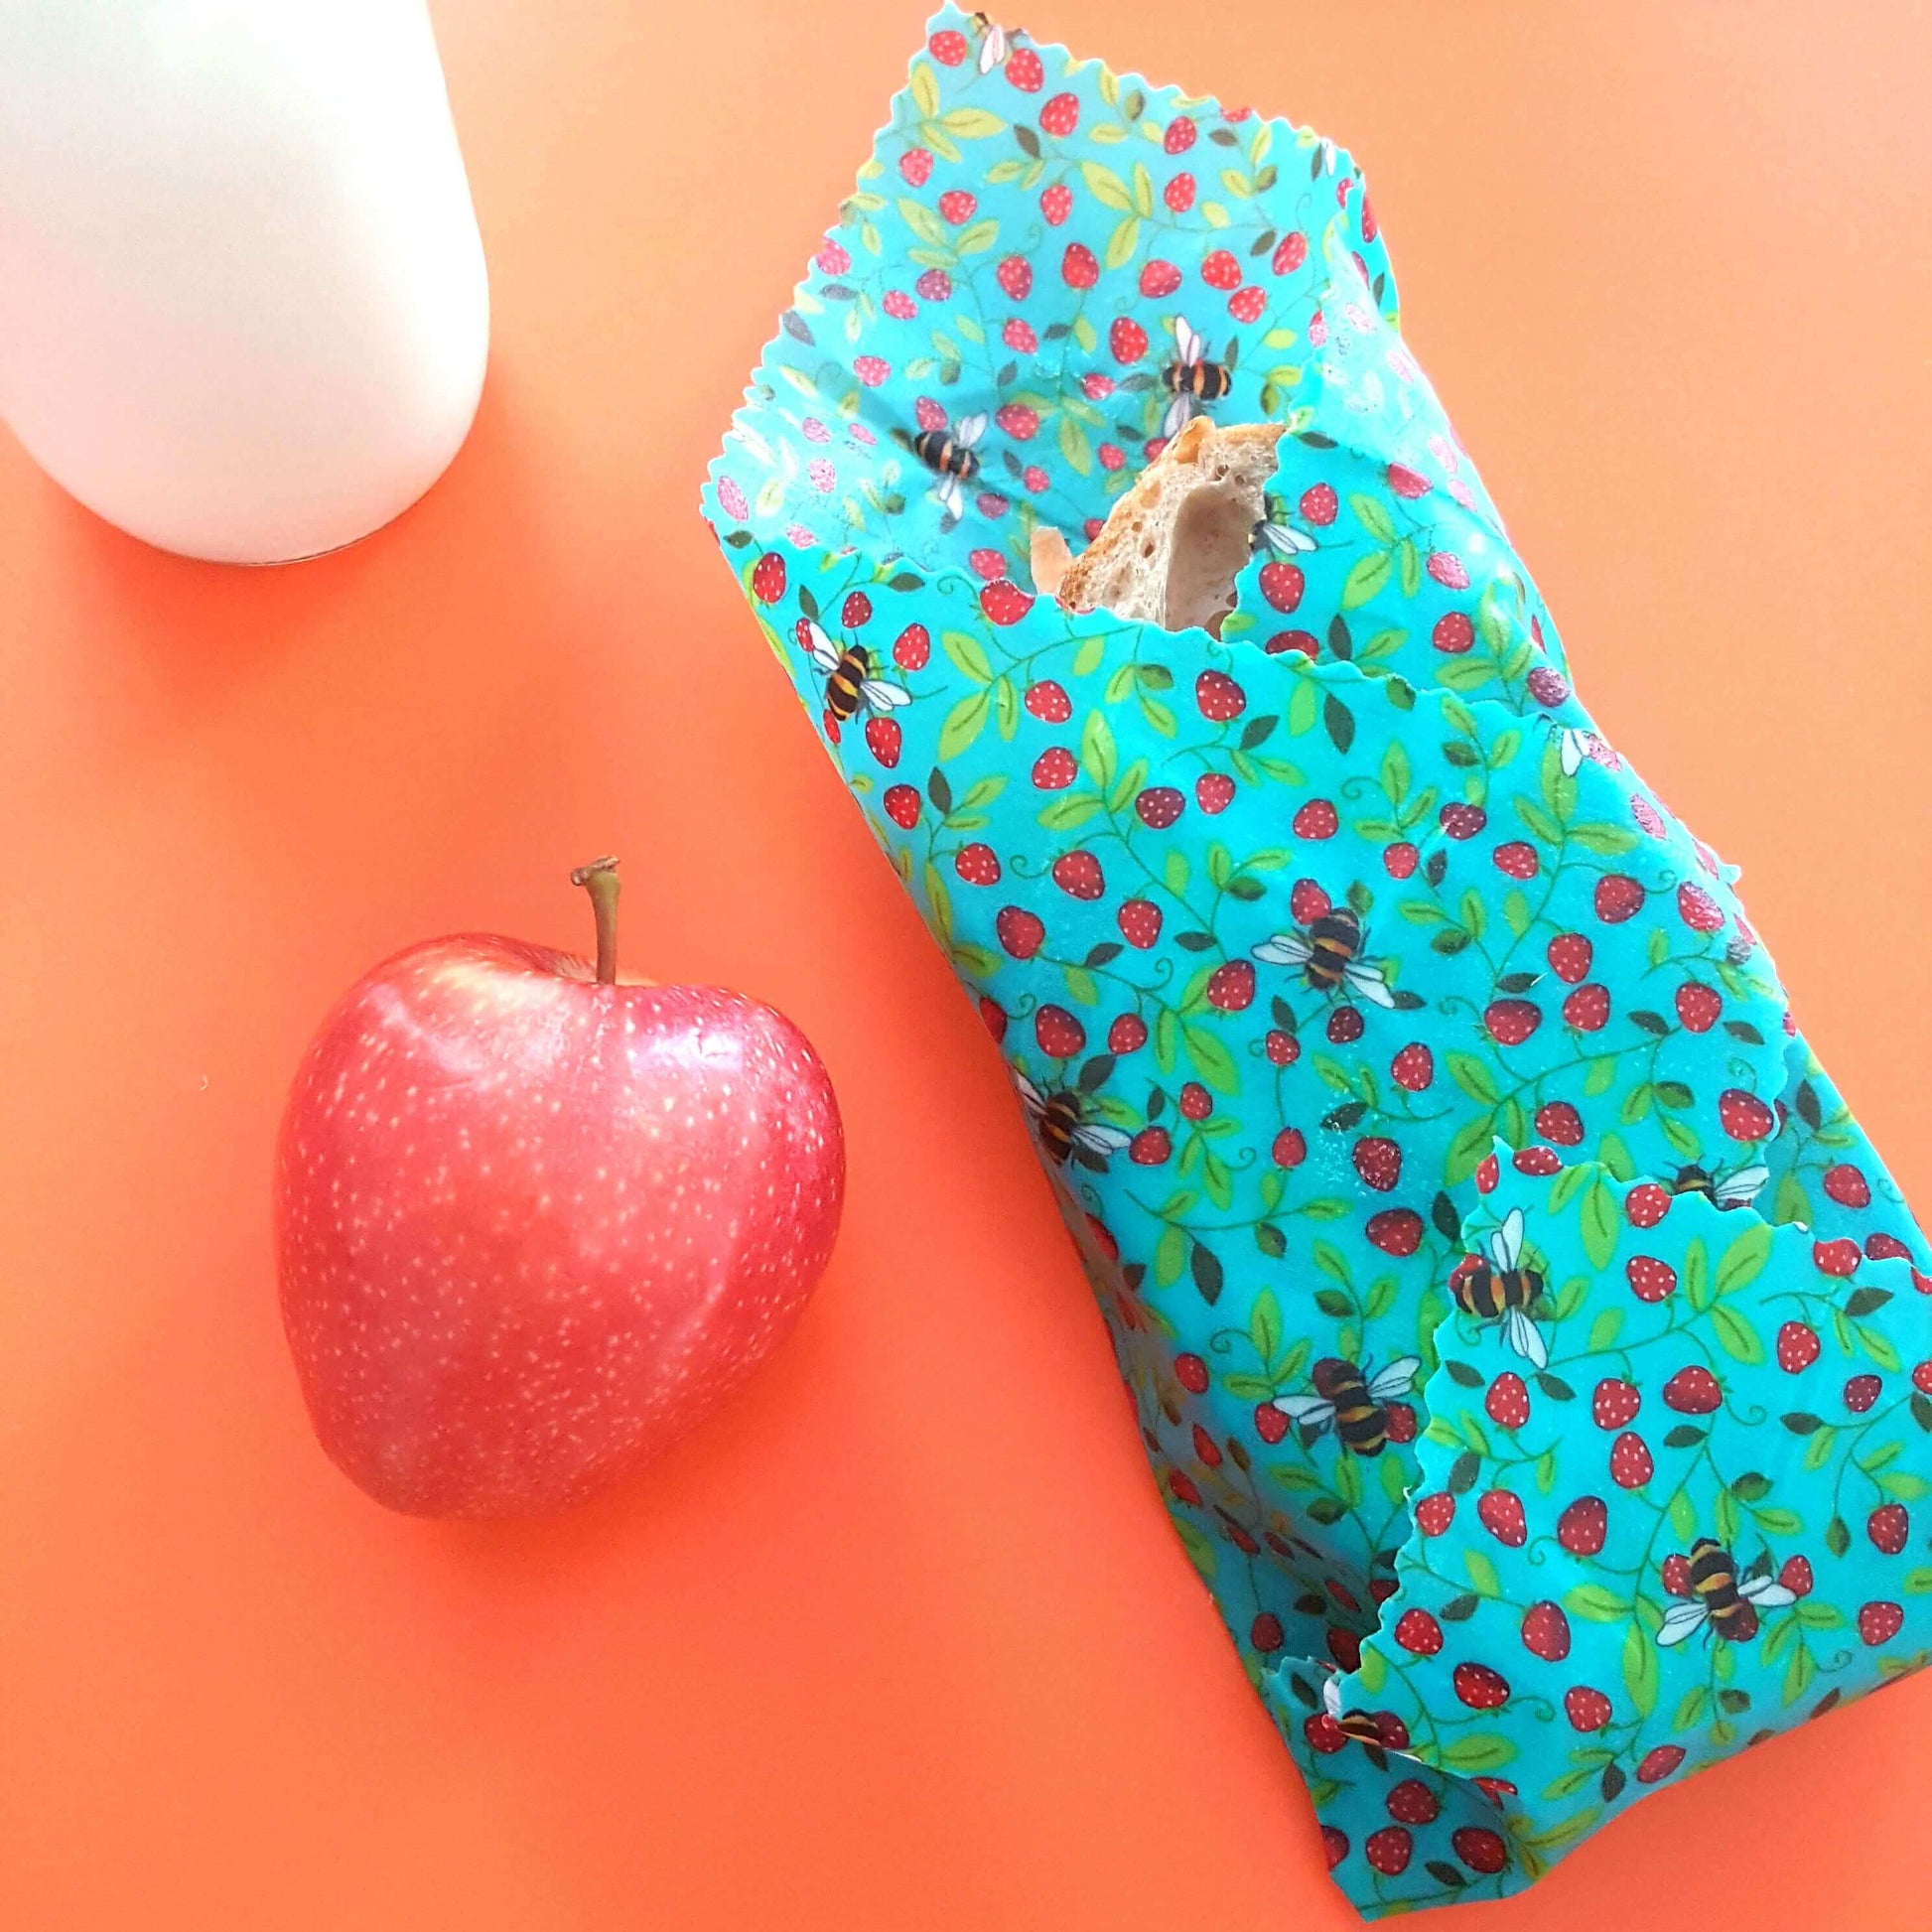 Planet-Kind single large beeswax wrap in Strawberry Bees pattern as flatlay